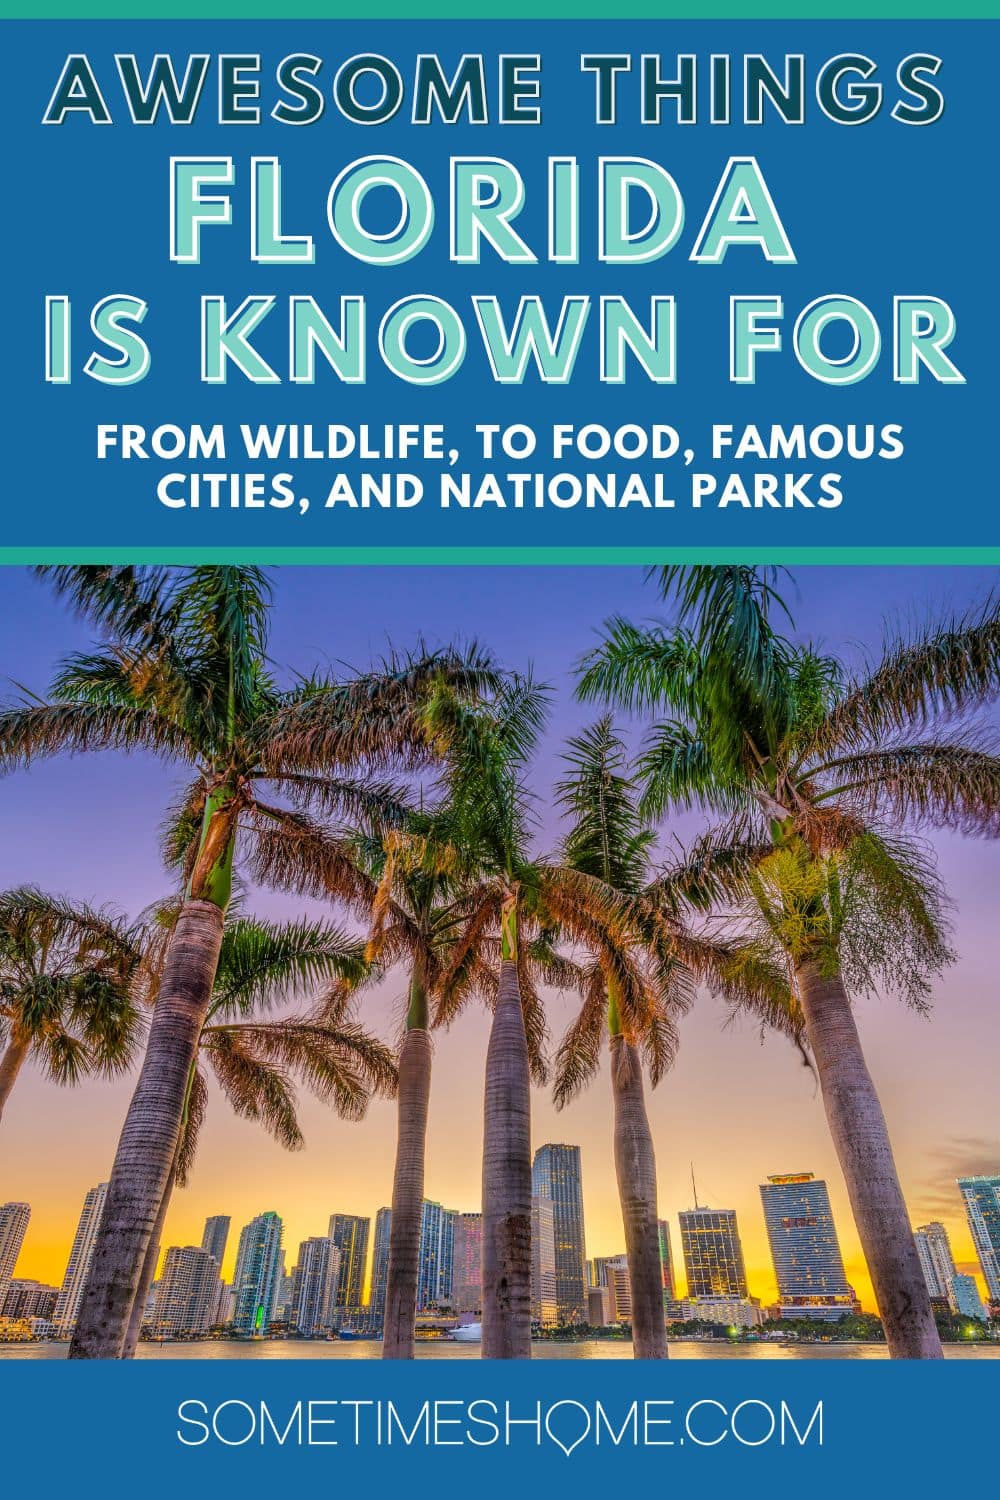 Awesome Things Florida is Known For: from Wildlife, to food, famous cities and National Parks, with a picture of palm trees and a skyline behind them during dusk.